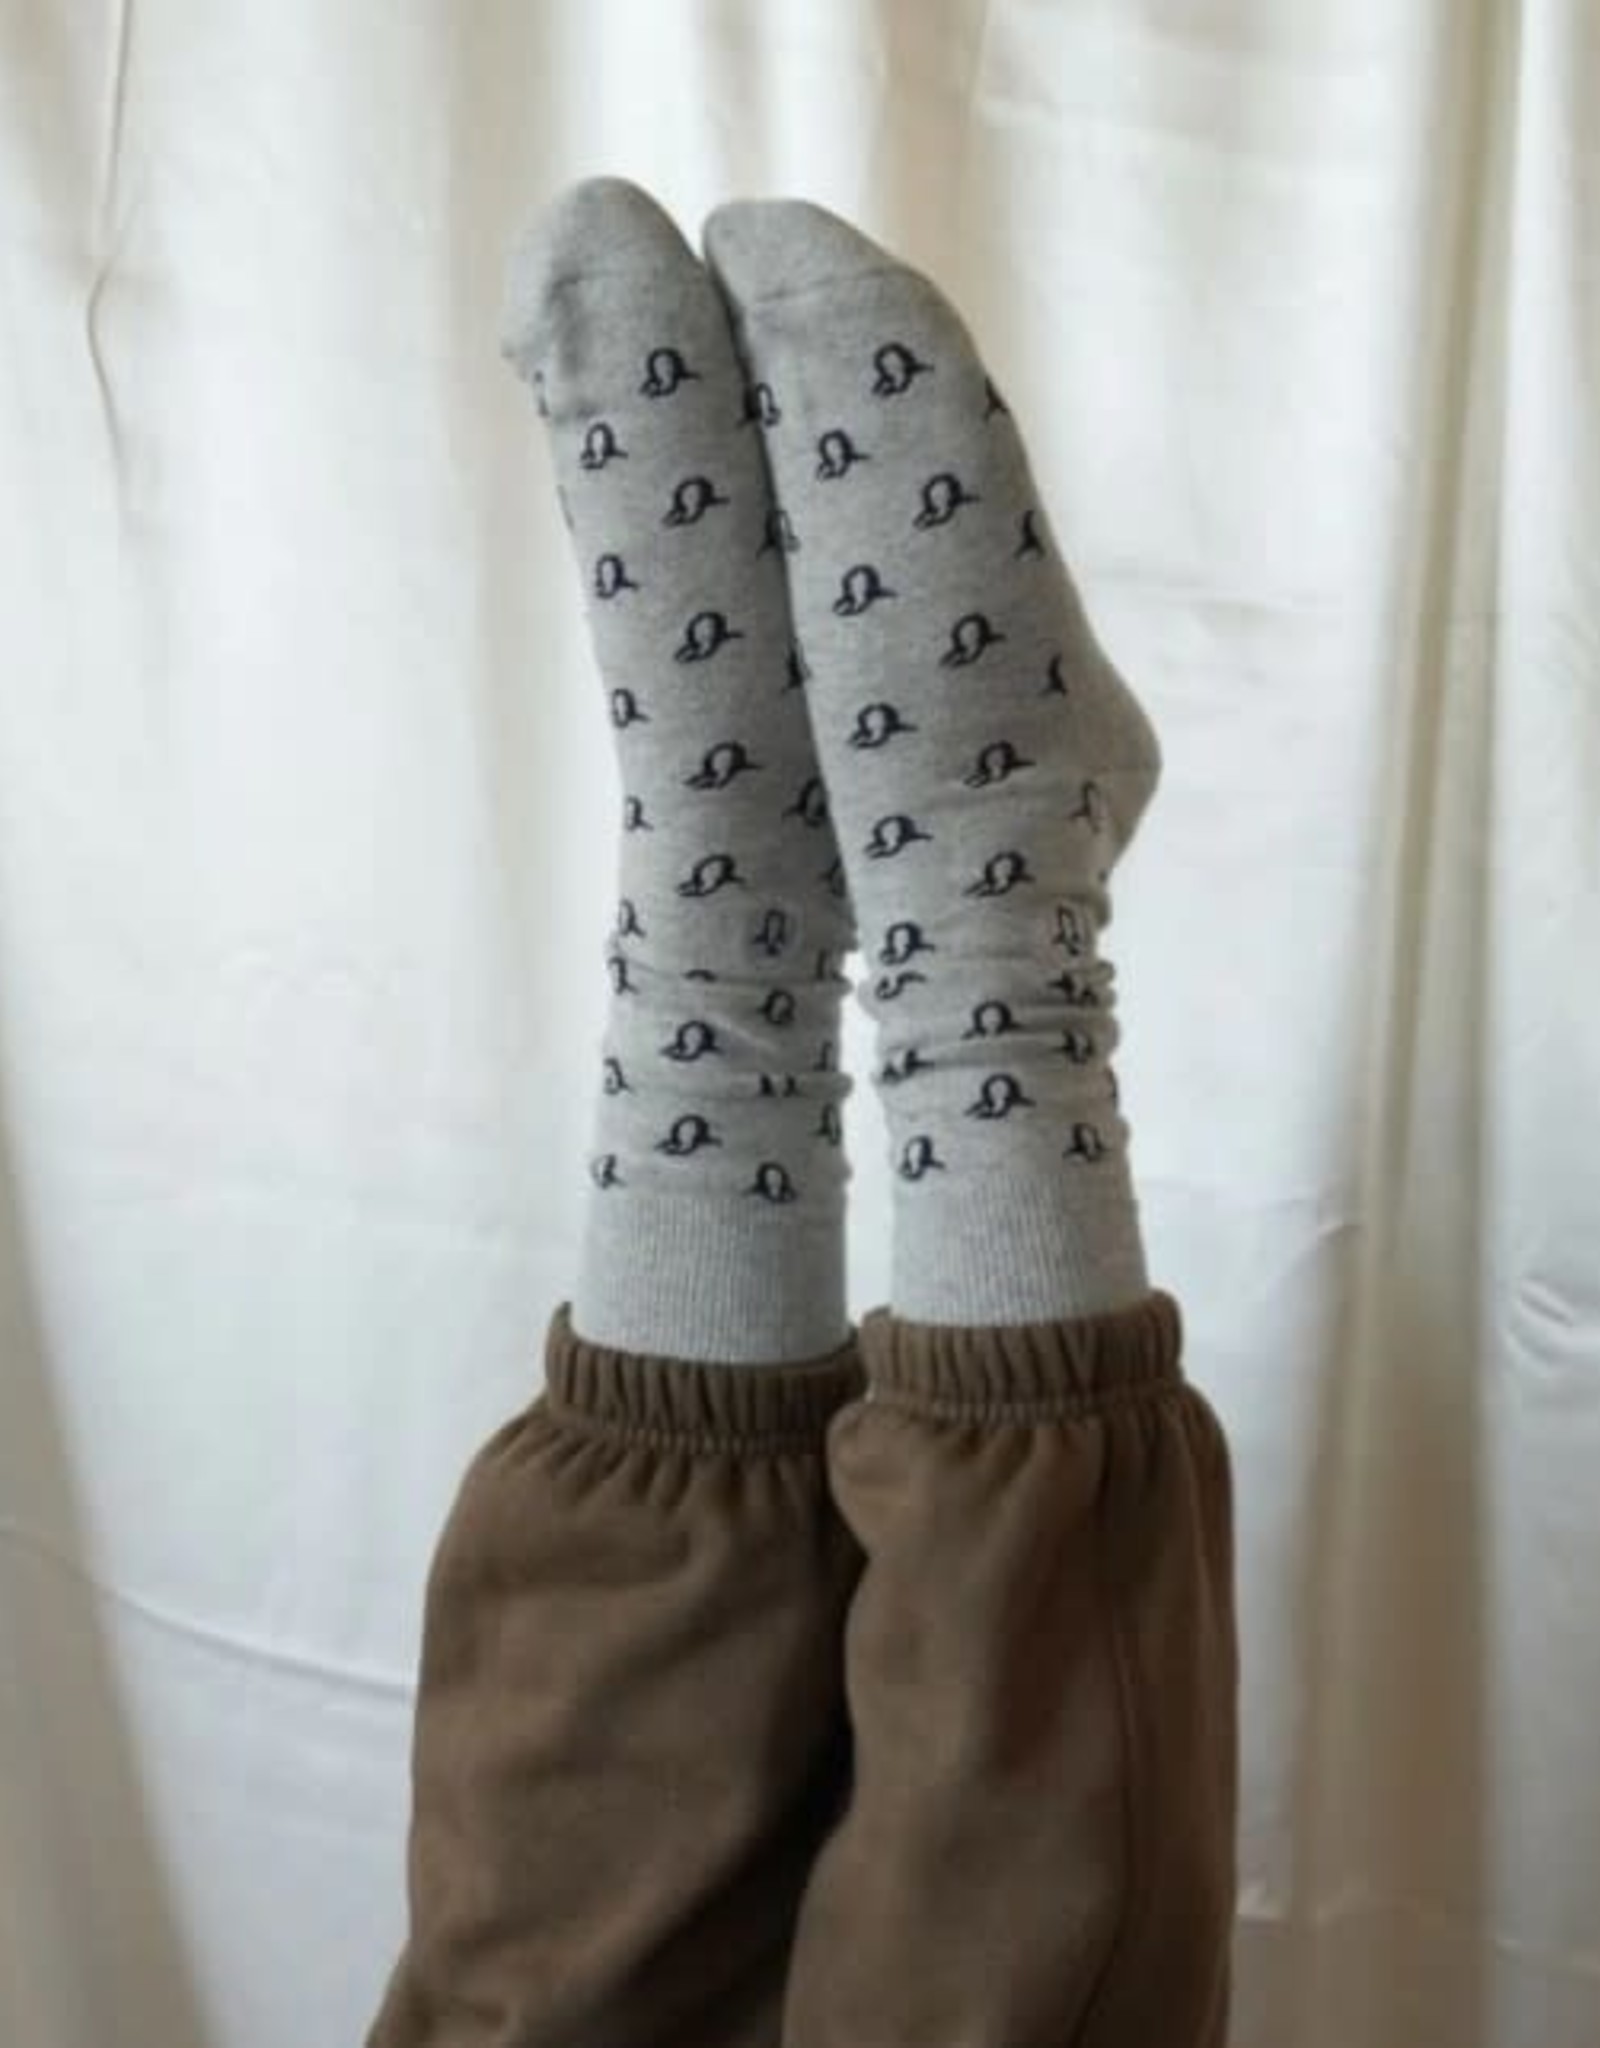 Conscious Step Socks that Protect Penguins